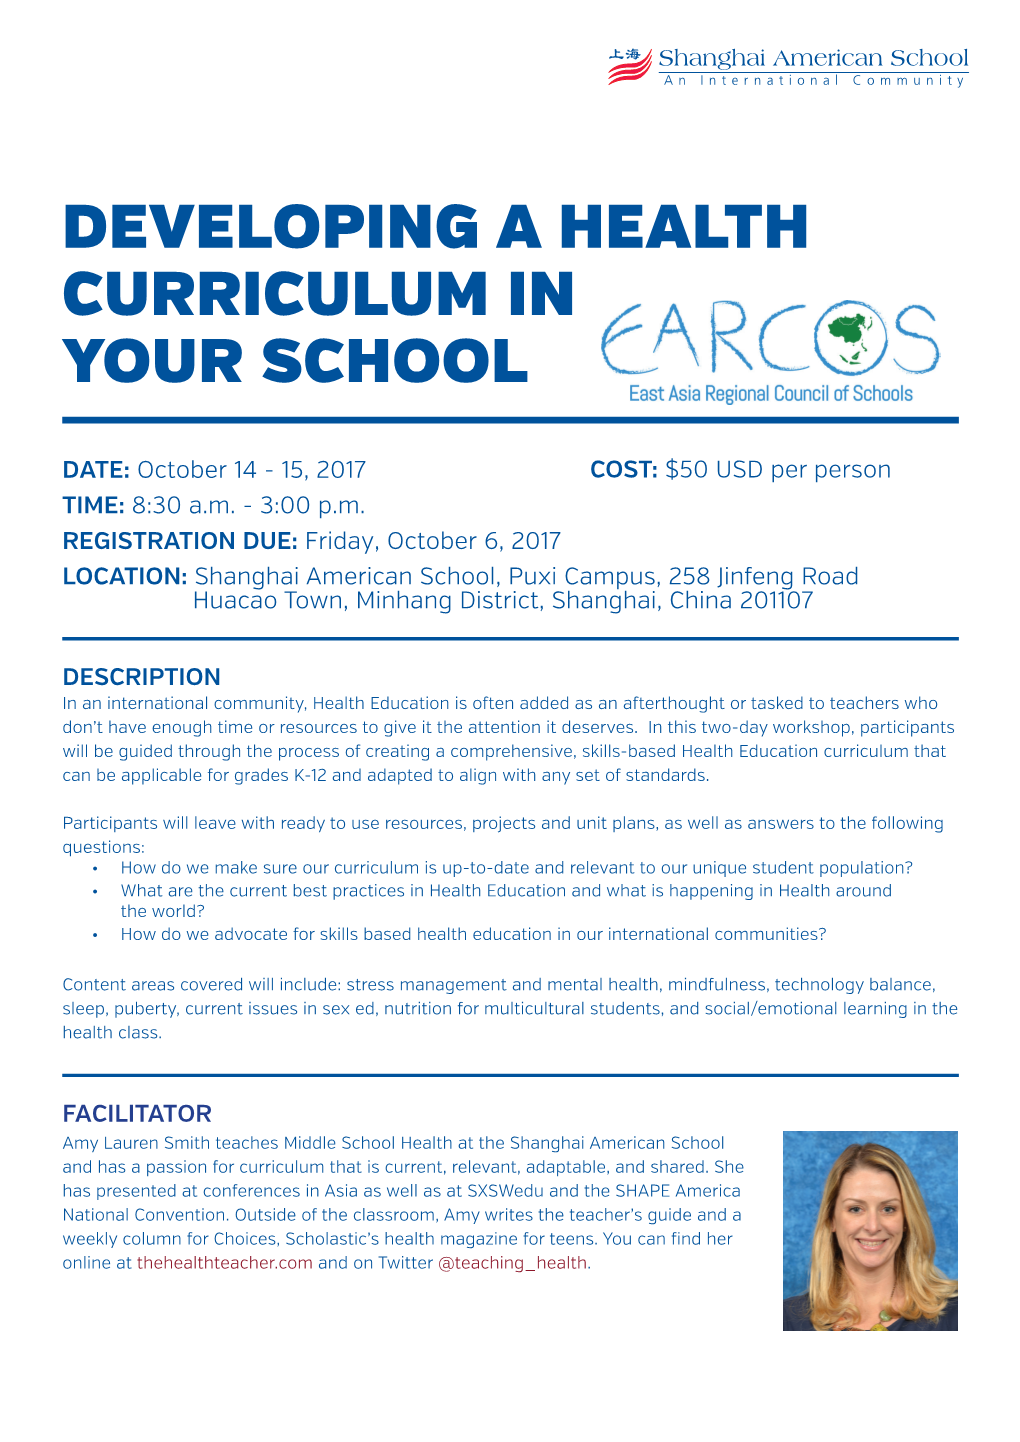 Developing a Health Curriculum in Your School